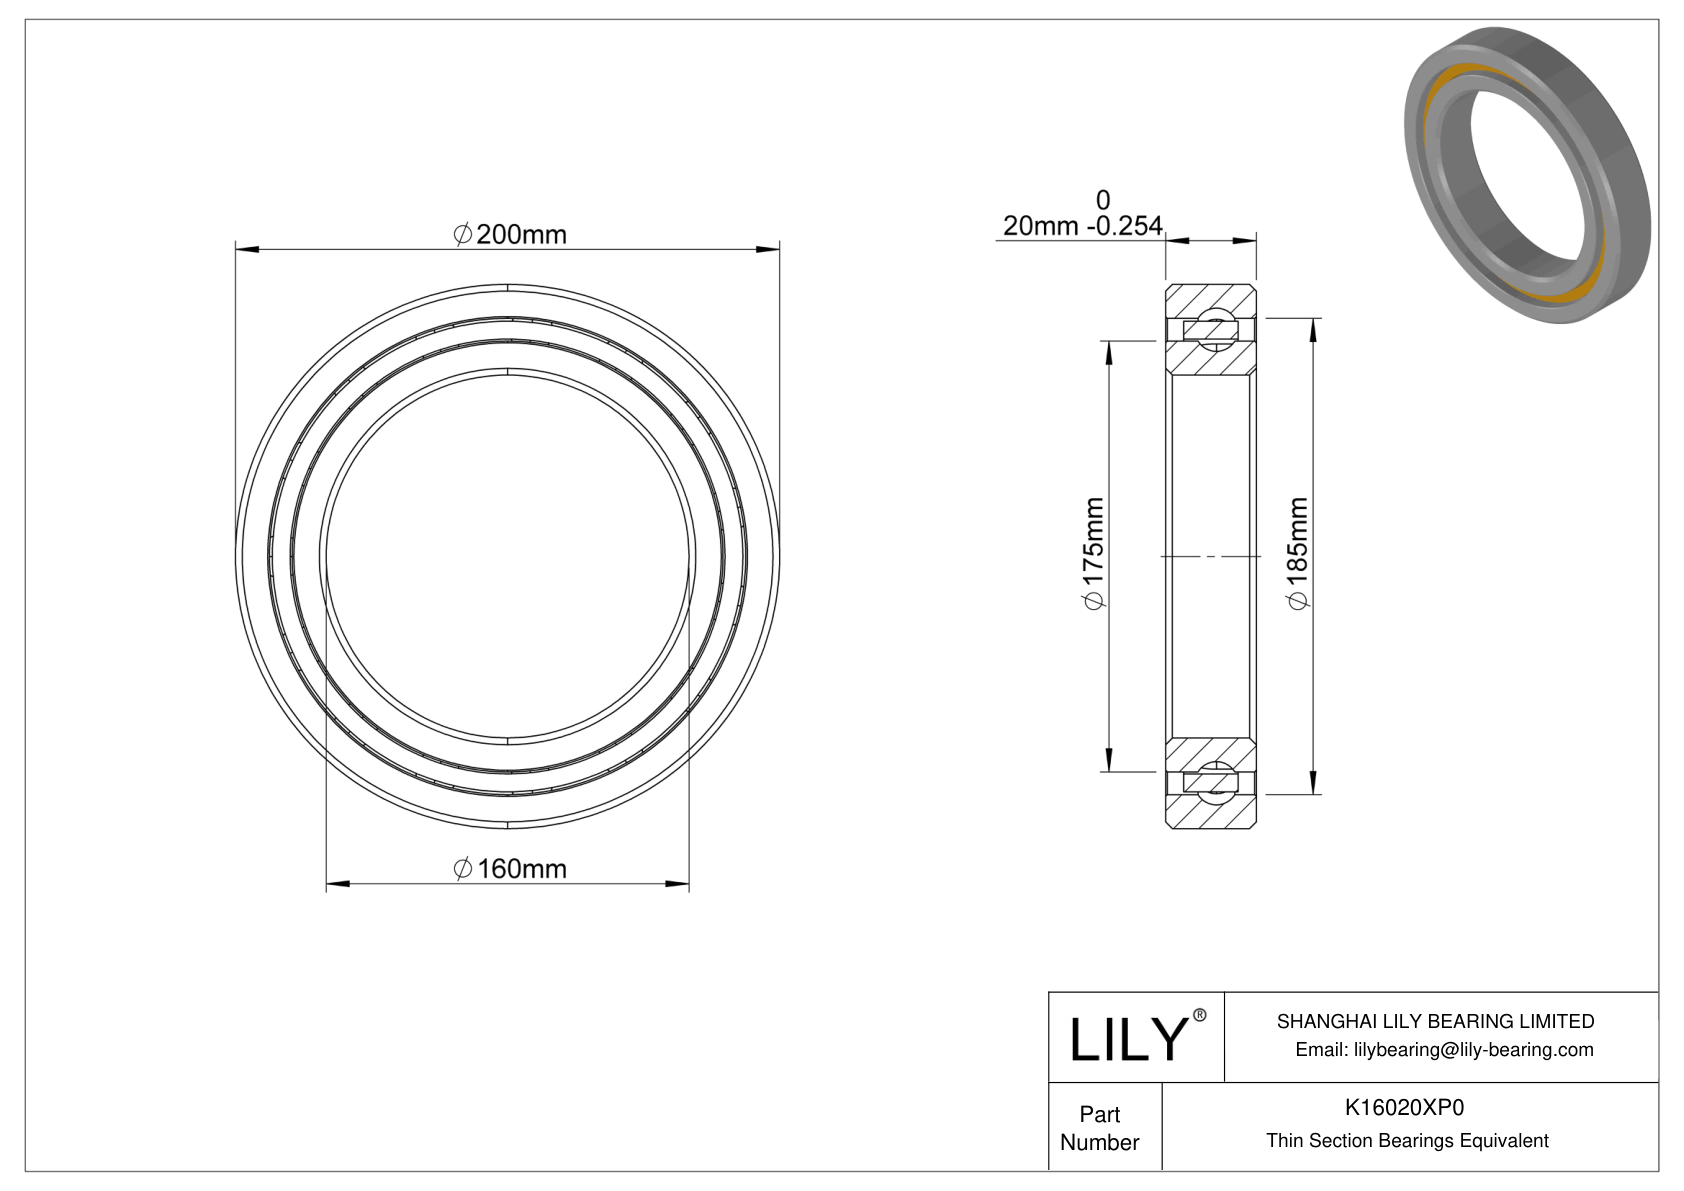 K16020XP0 Constant Section (CS) Bearings cad drawing